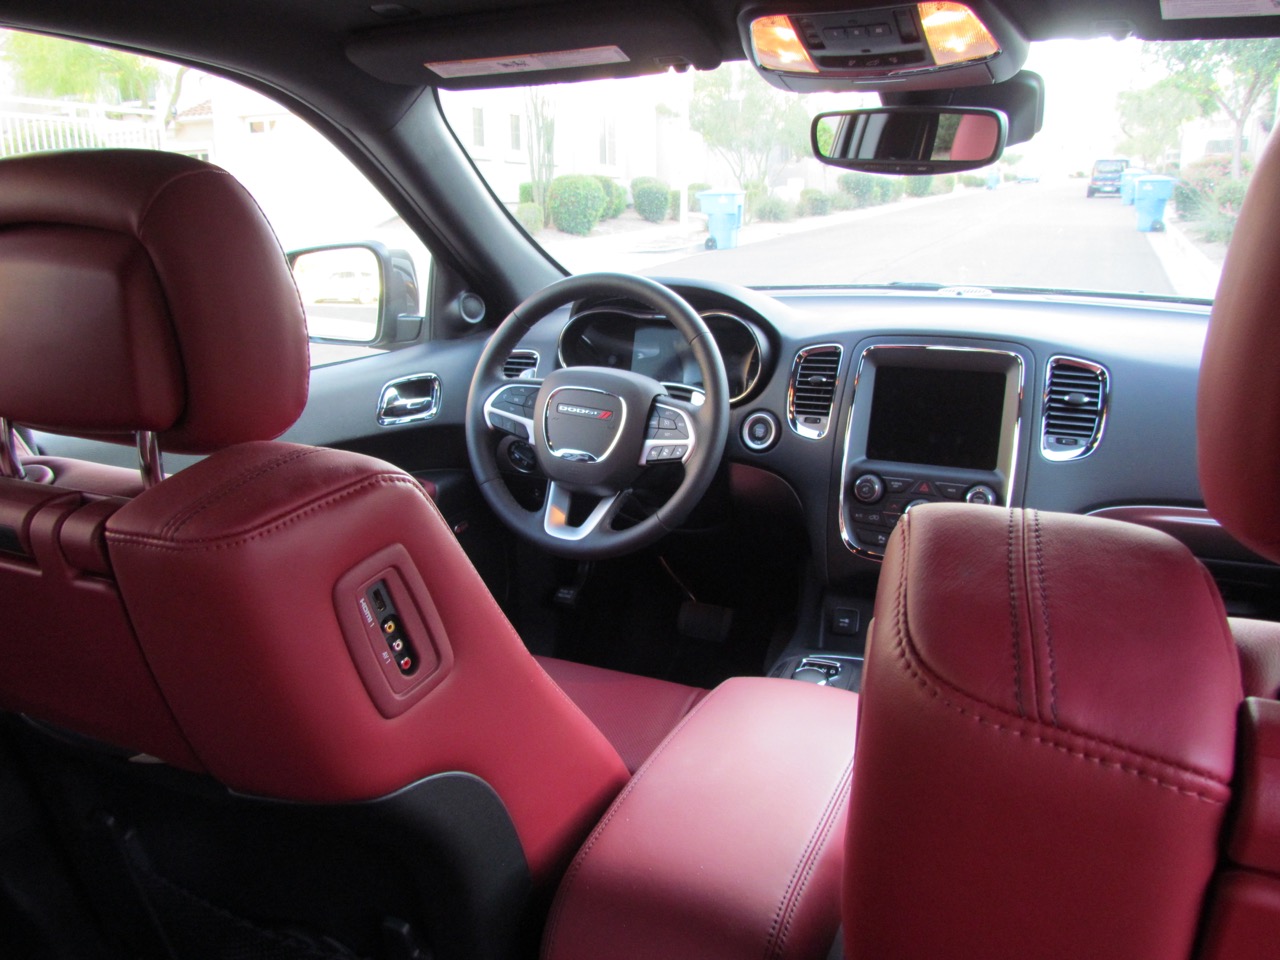 Red leather interior dazzles the eyes when you open the doors